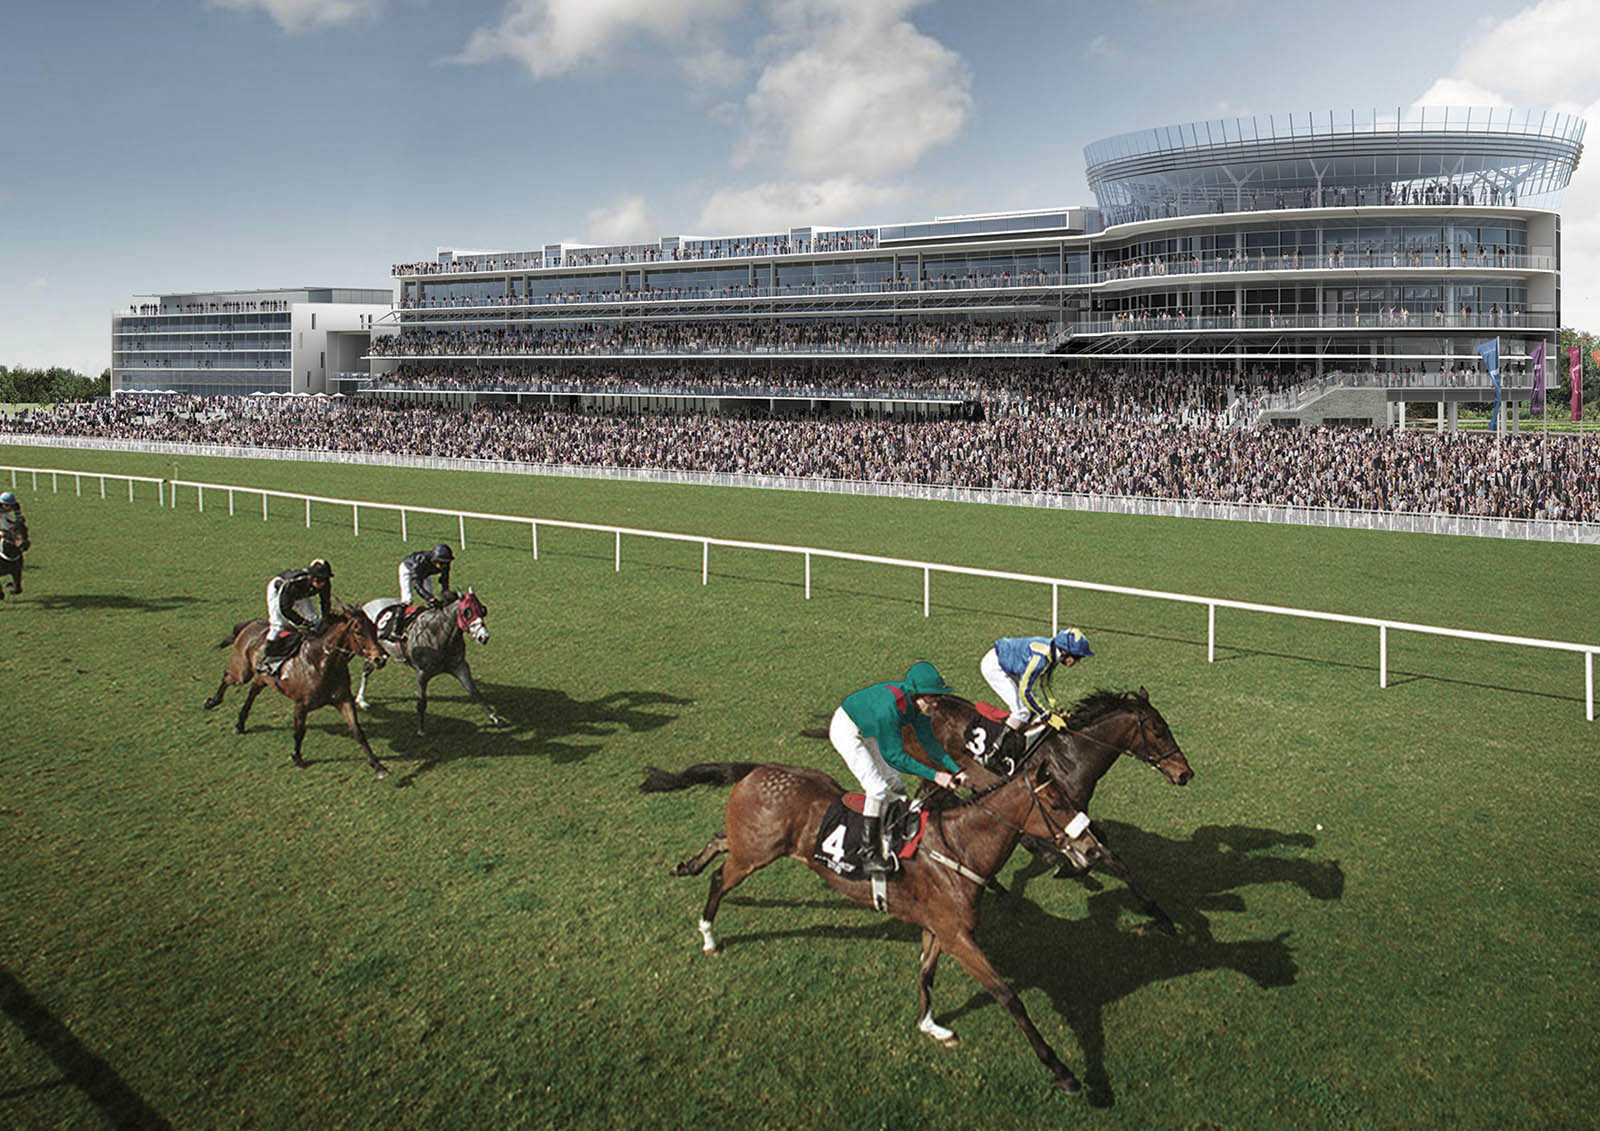 Visualisation of horses racing in front of large VIP boxes